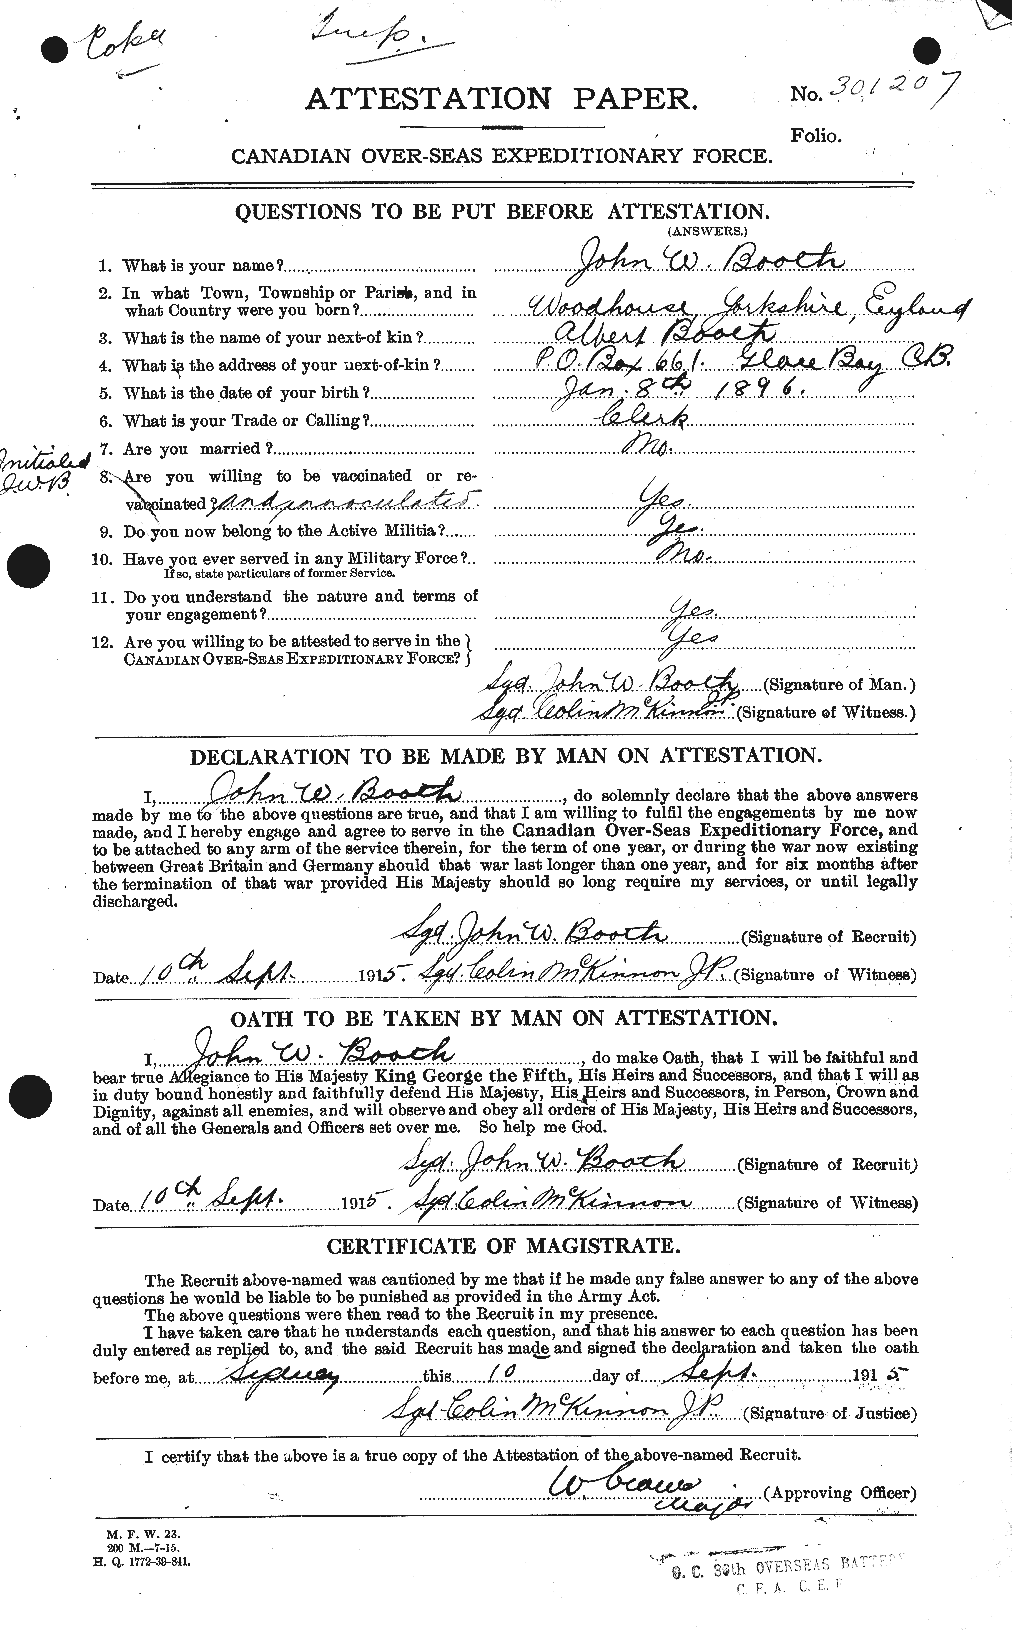 Personnel Records of the First World War - CEF 250934a